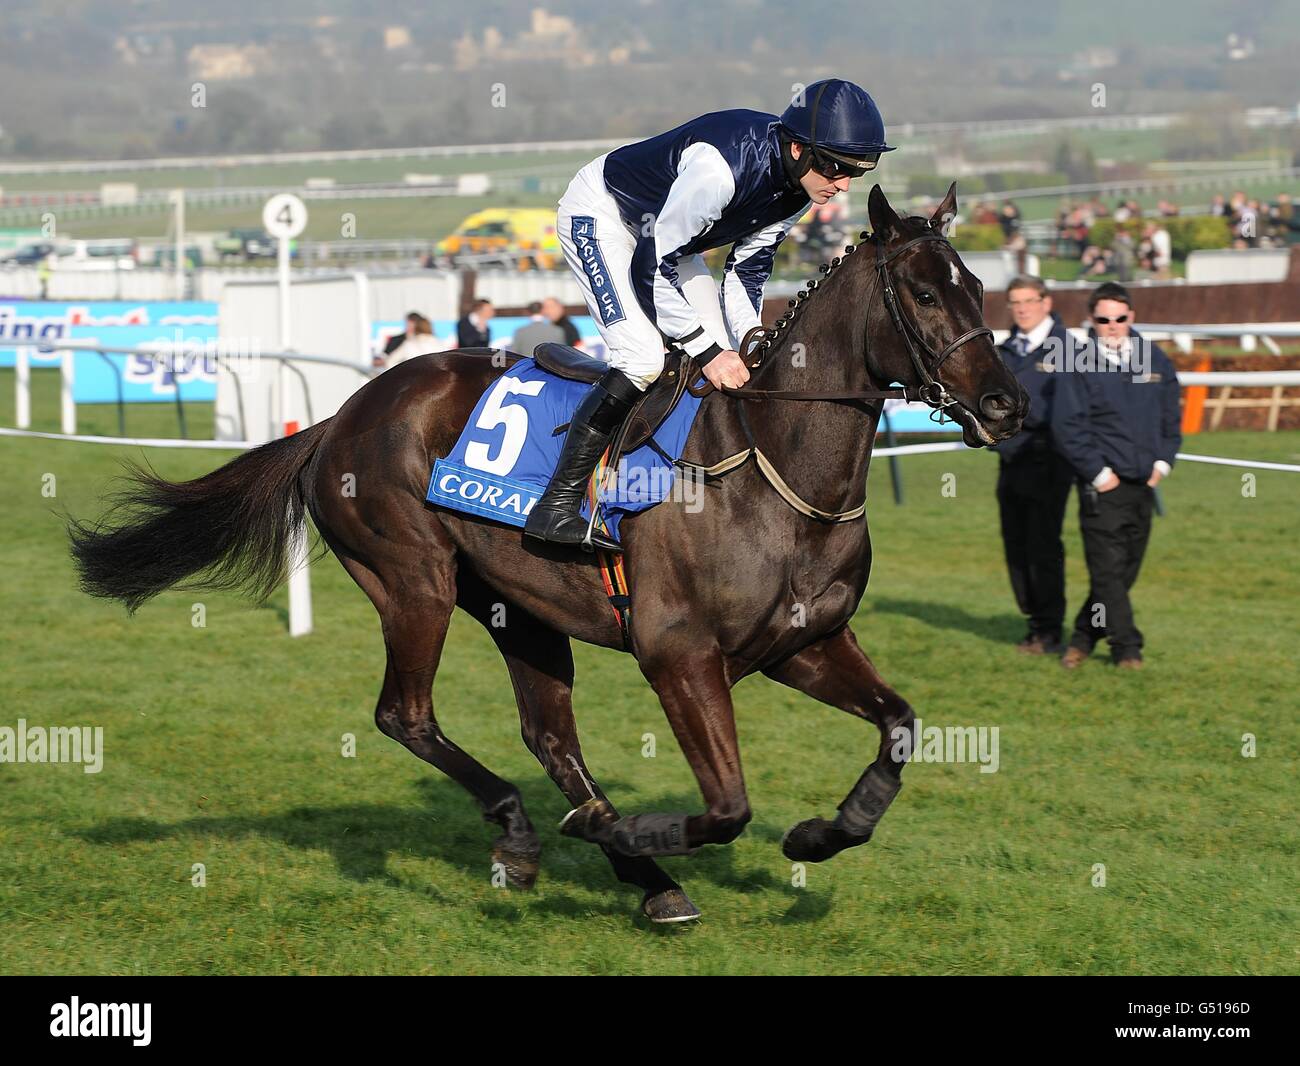 Final Approach ridden by jockey Ruby Walsh going to post prior to the Coral Cup on Ladies Day, during the Cheltenham Festival. Stock Photo